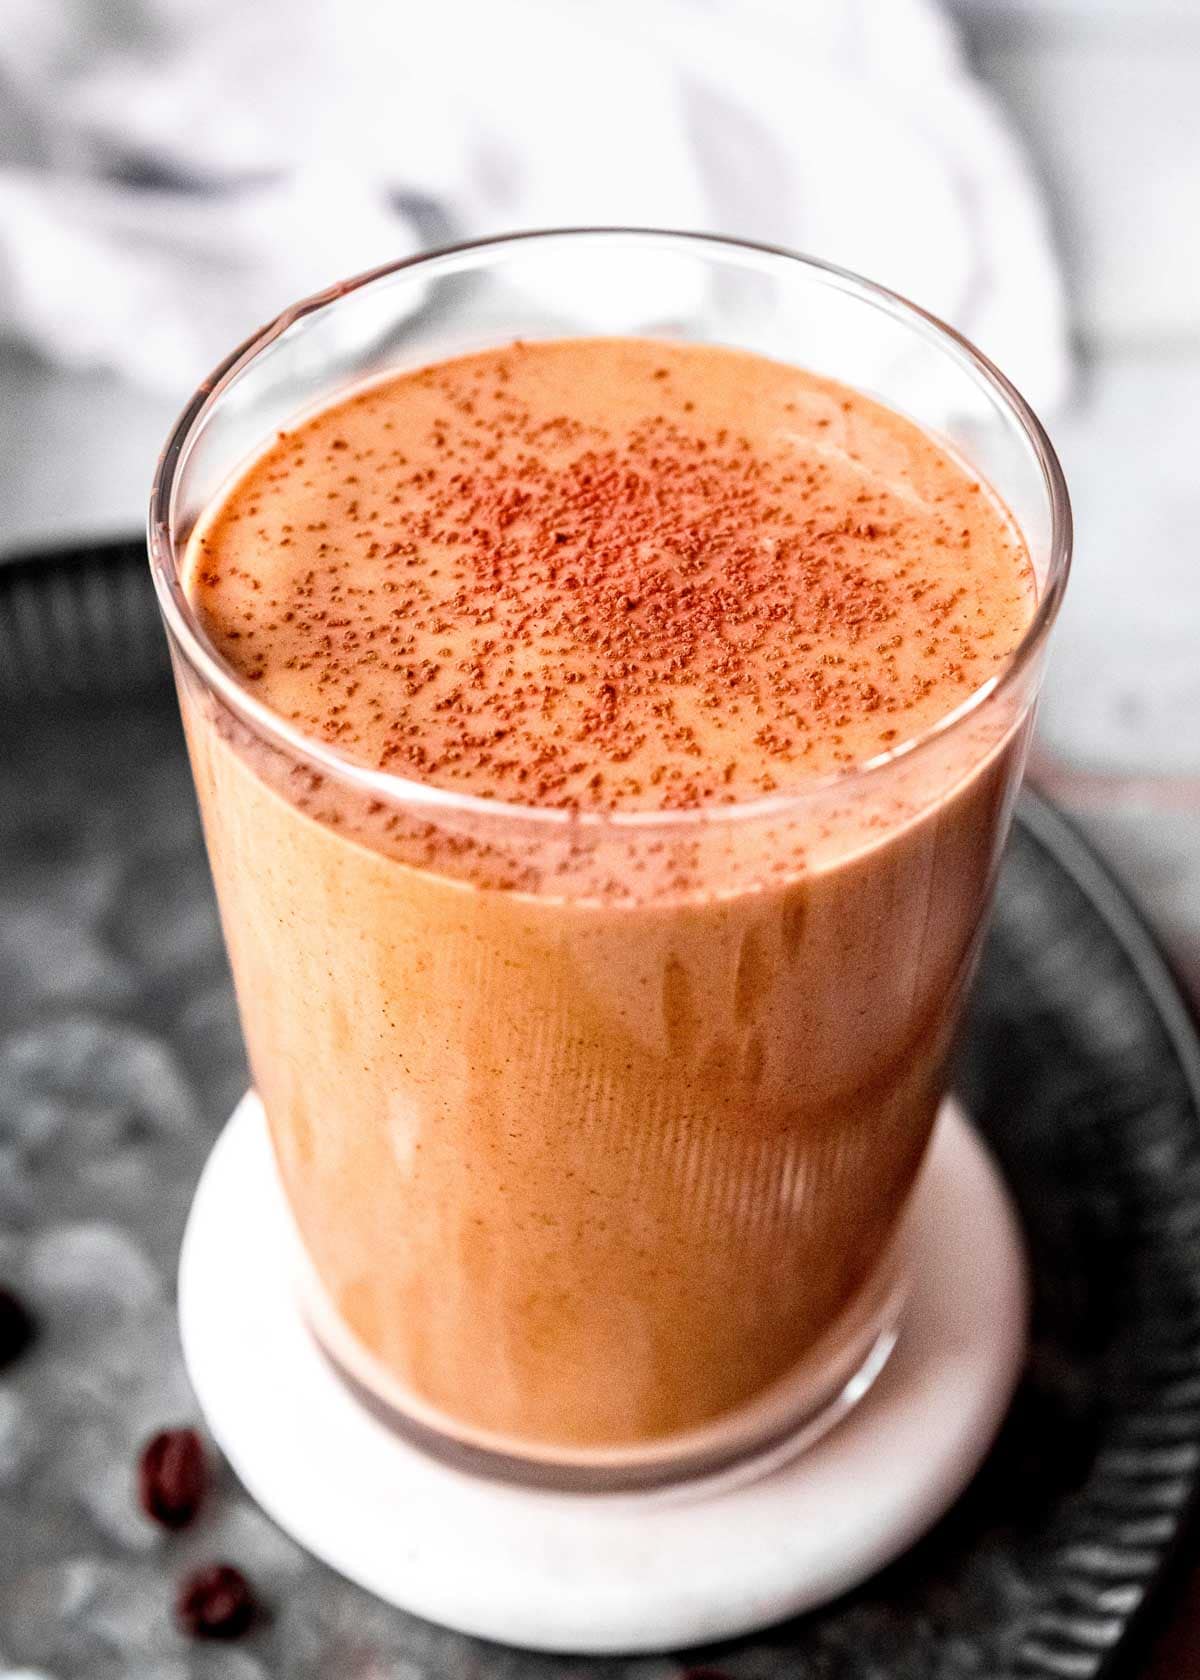 keto smoothie sprinkled with cocoa powder garnish